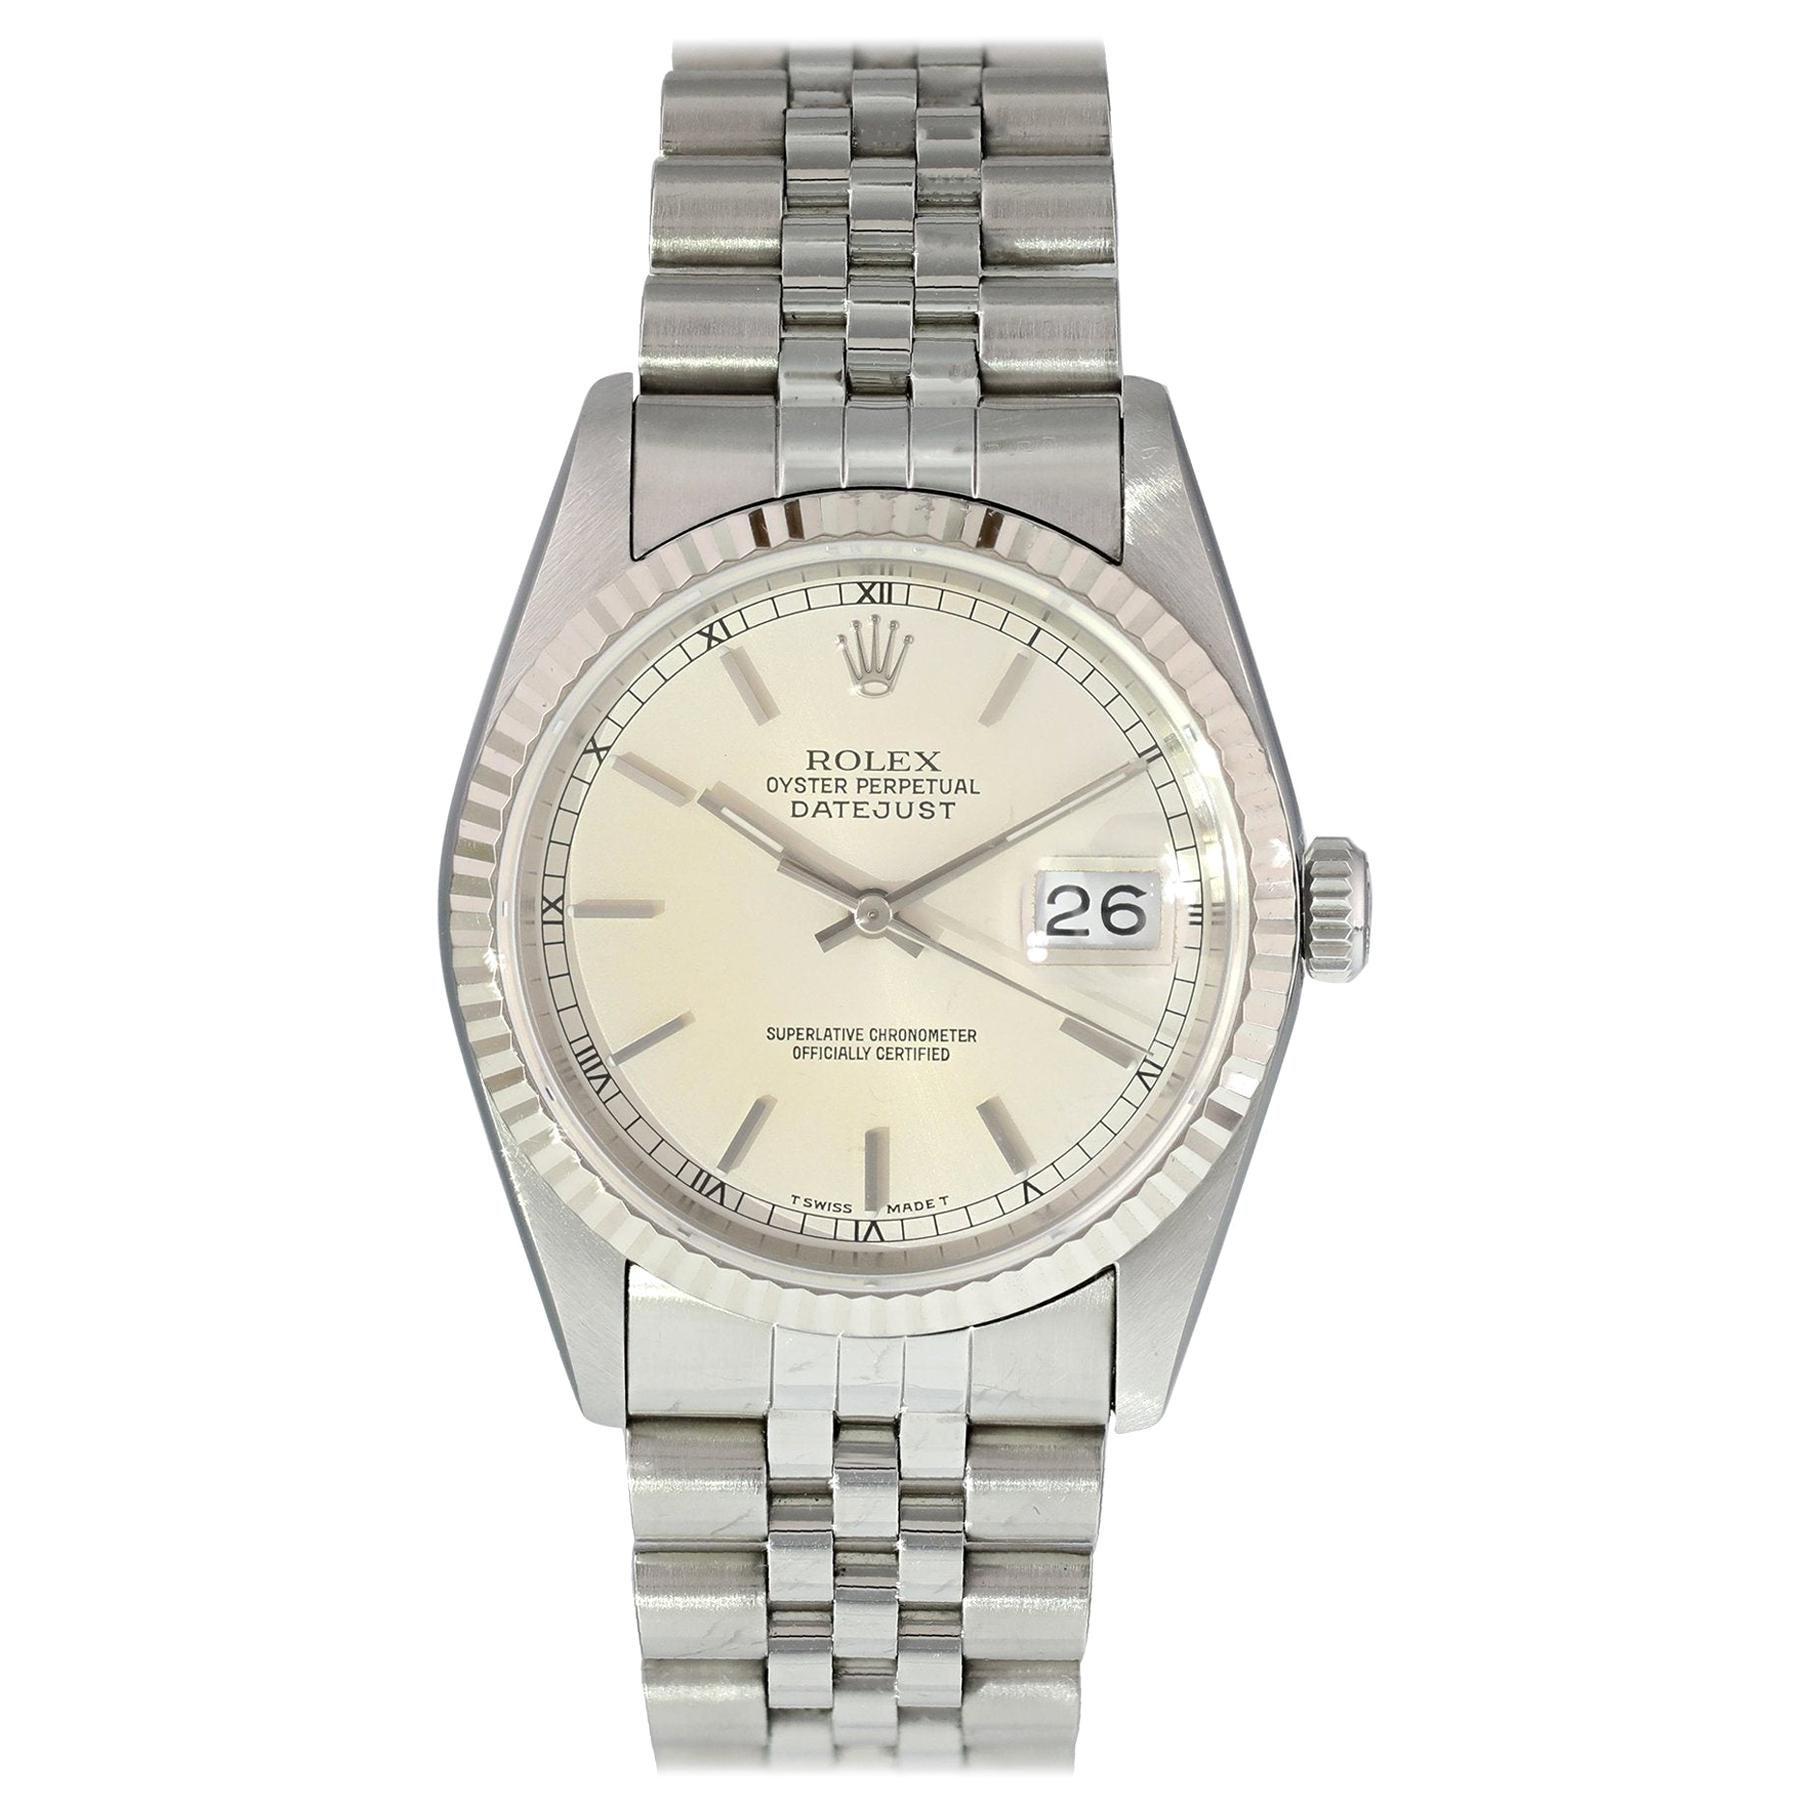 Rolex Oyster Perpetual Datejust 16014 Men's Watch For Sale